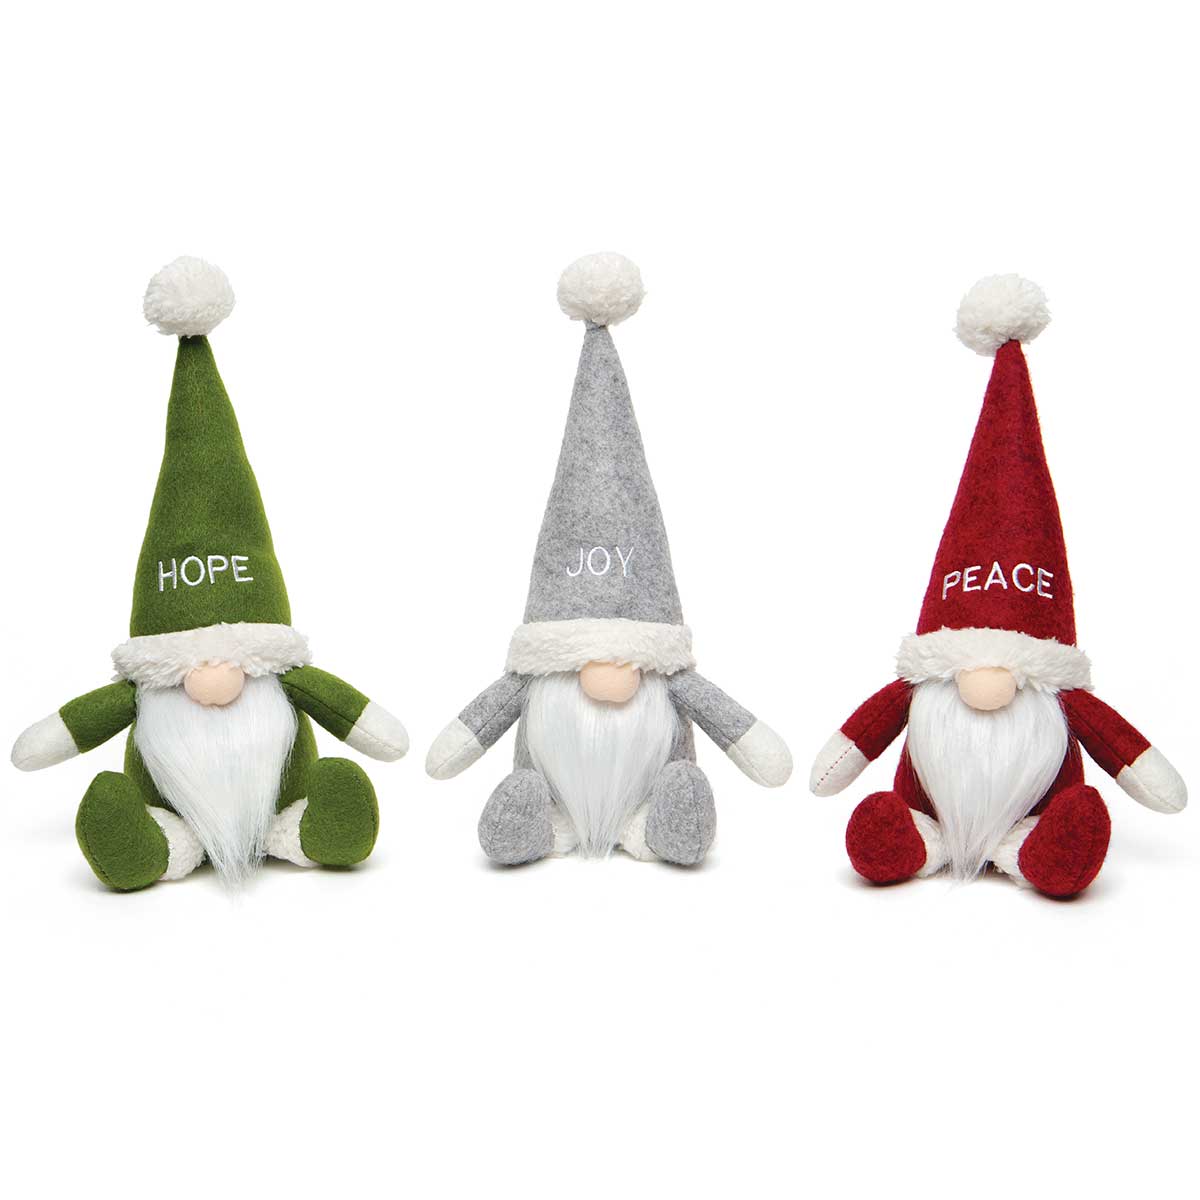 MESSAGE GNOME RED/GREEN/GREY WITH POM-POM